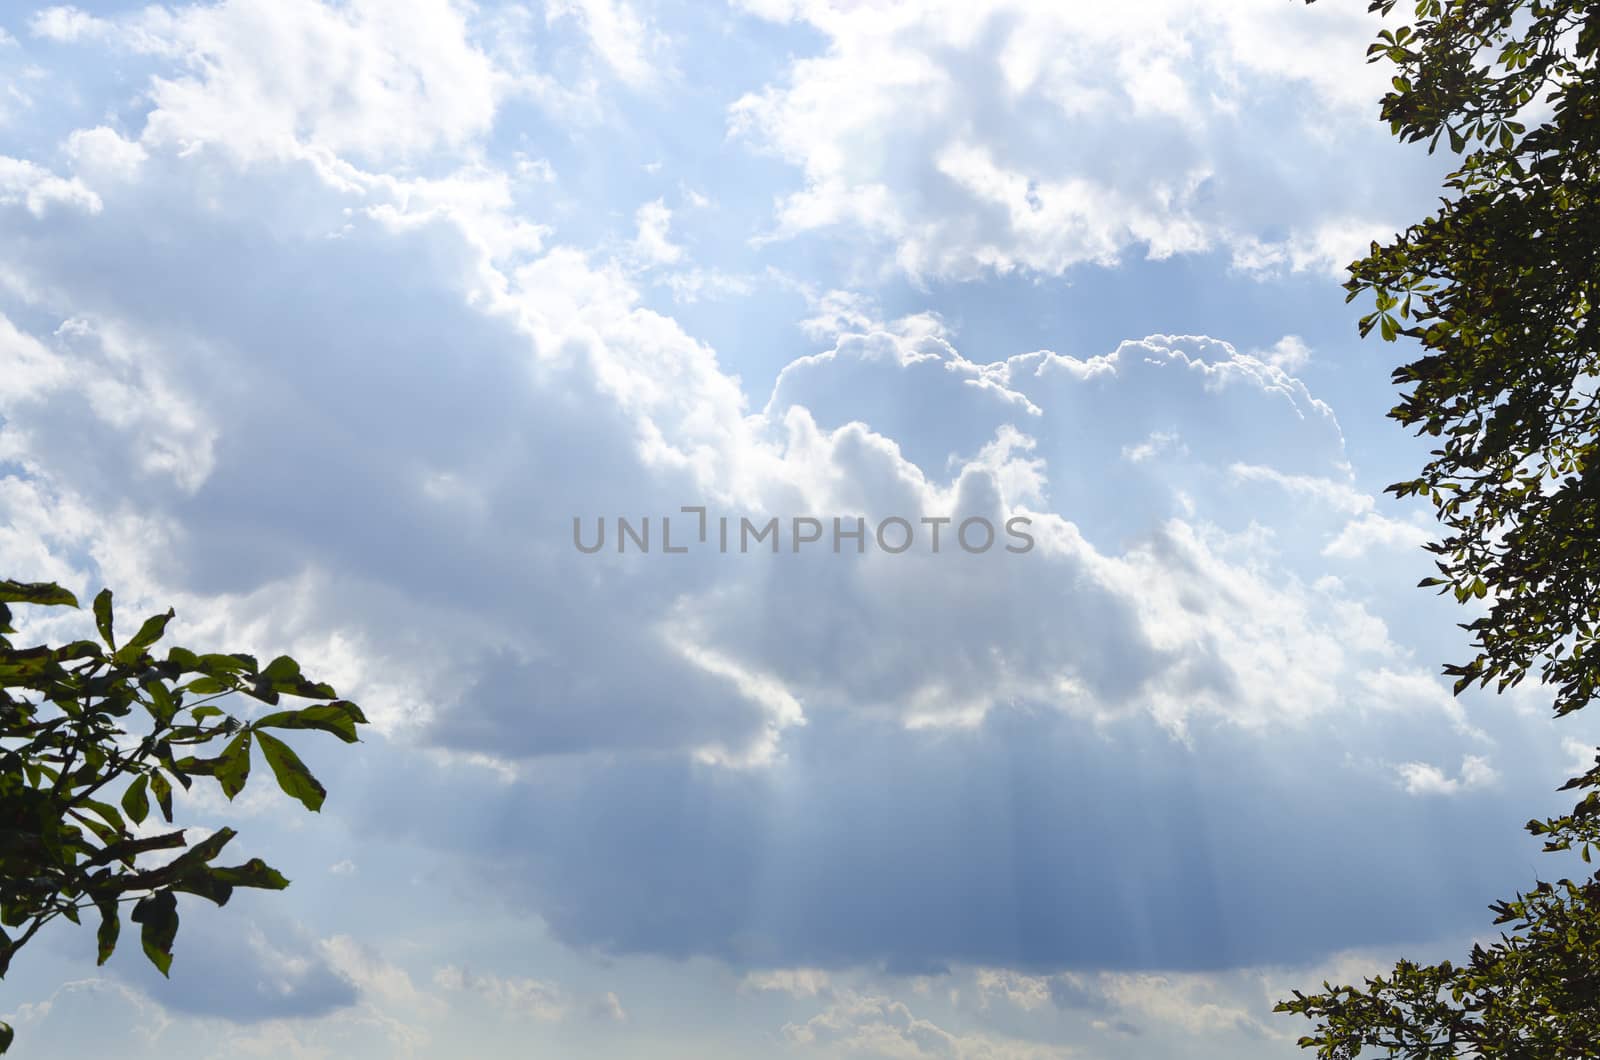 scenery of clouds with rays of light coming down through them seen through branches